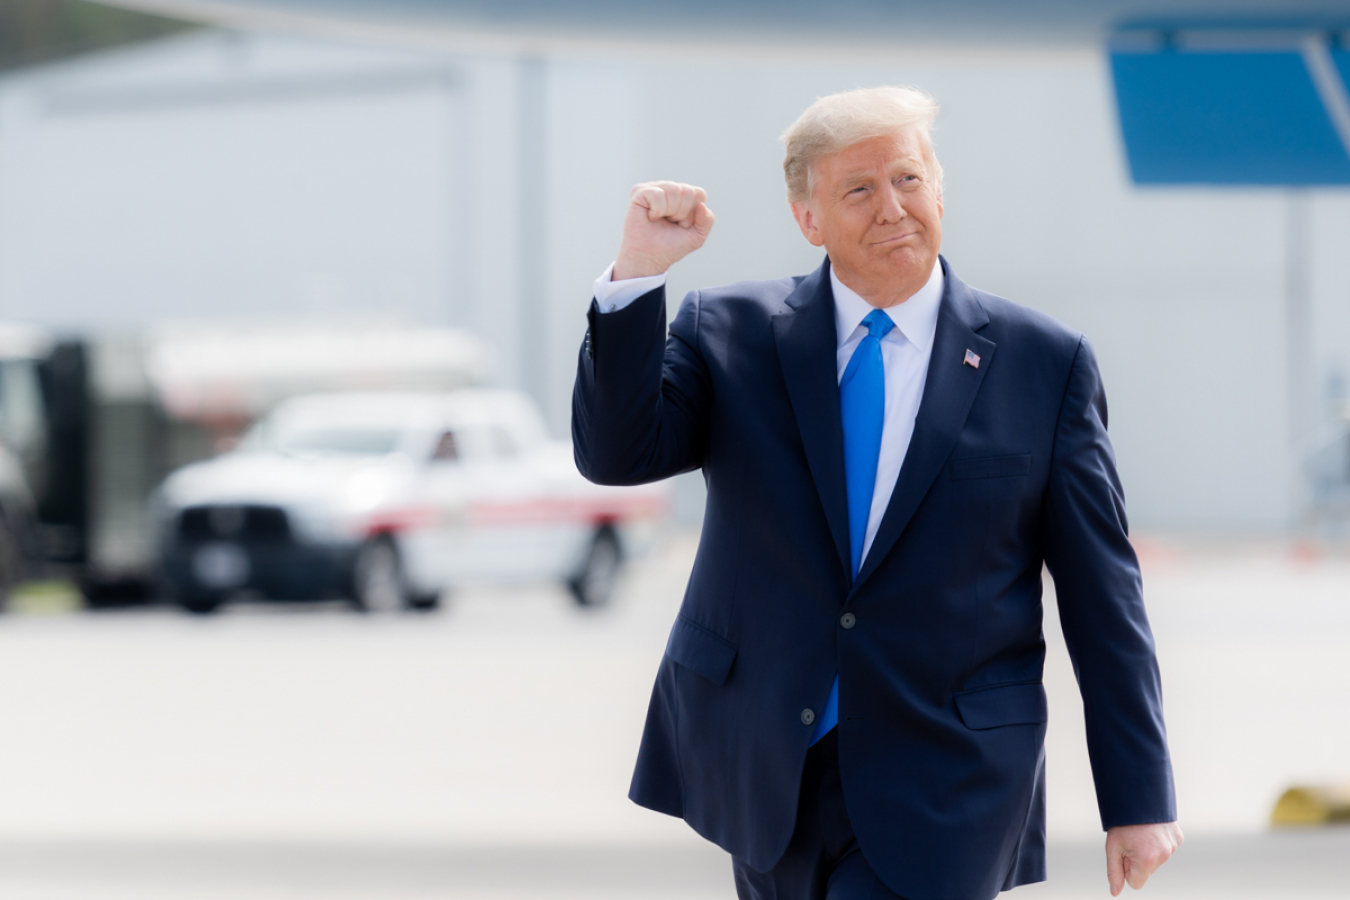 President Trump Travels to NC 15 October 2020